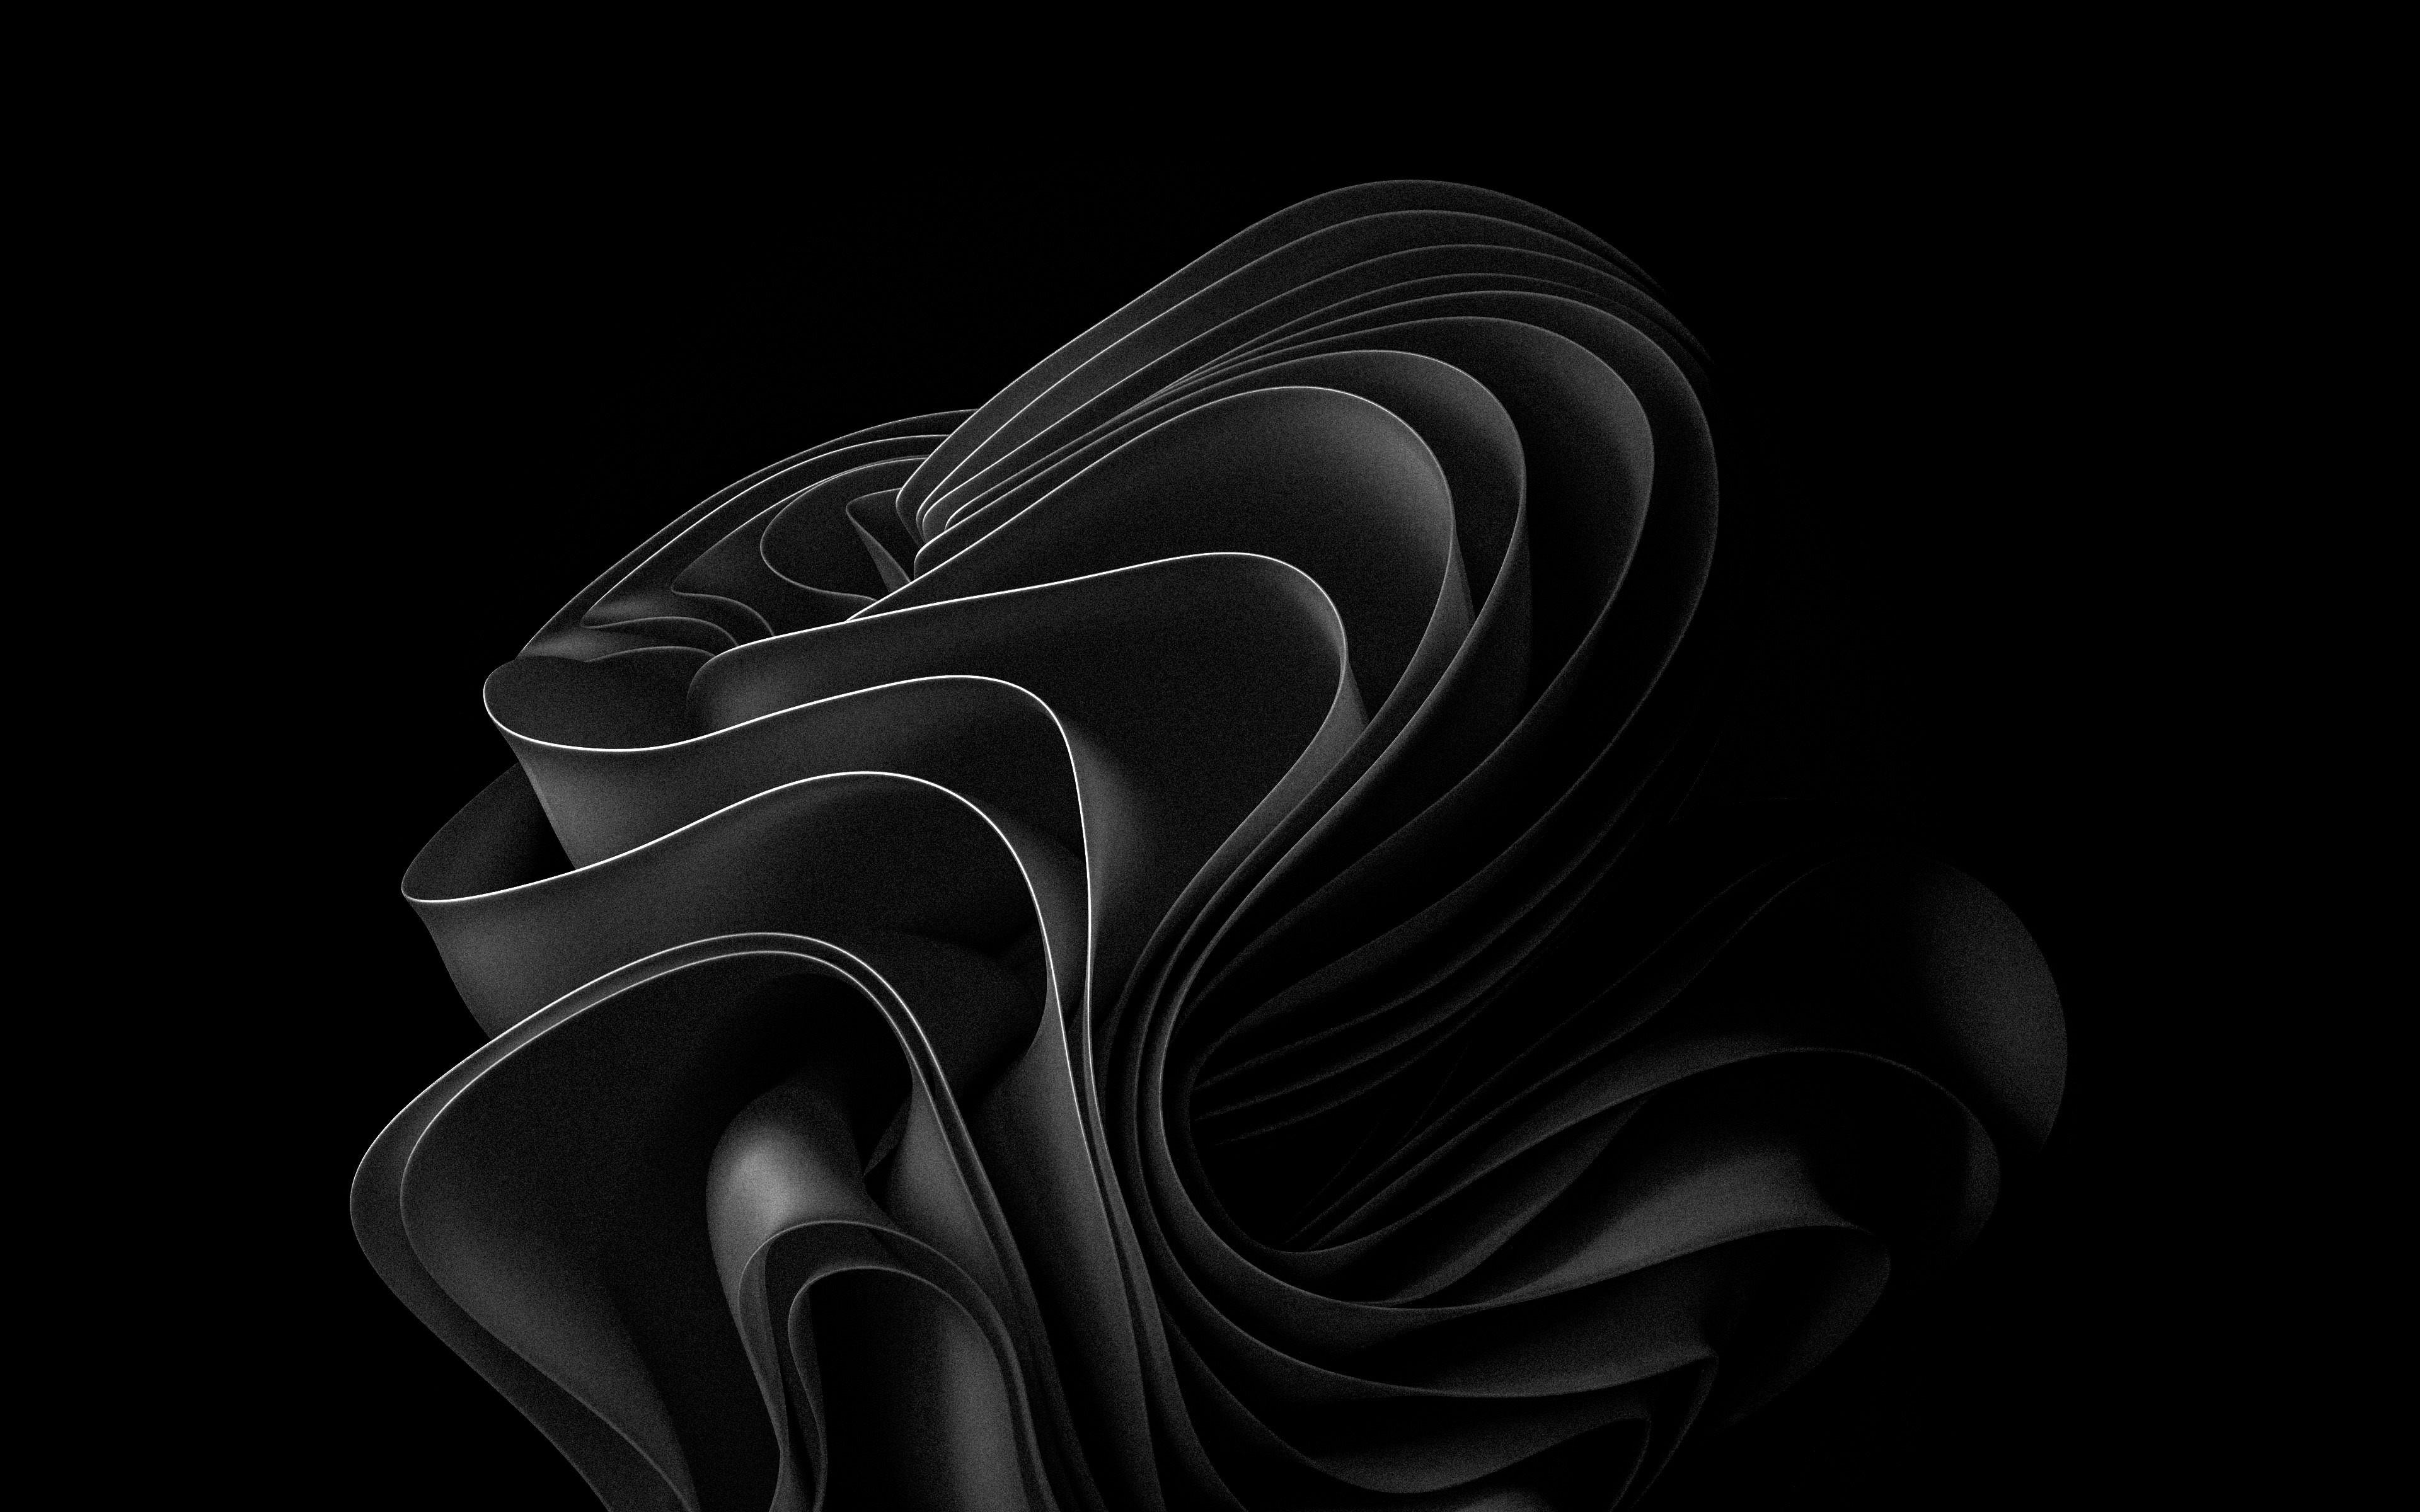 Here are some beautiful dark windows stock wallpapers